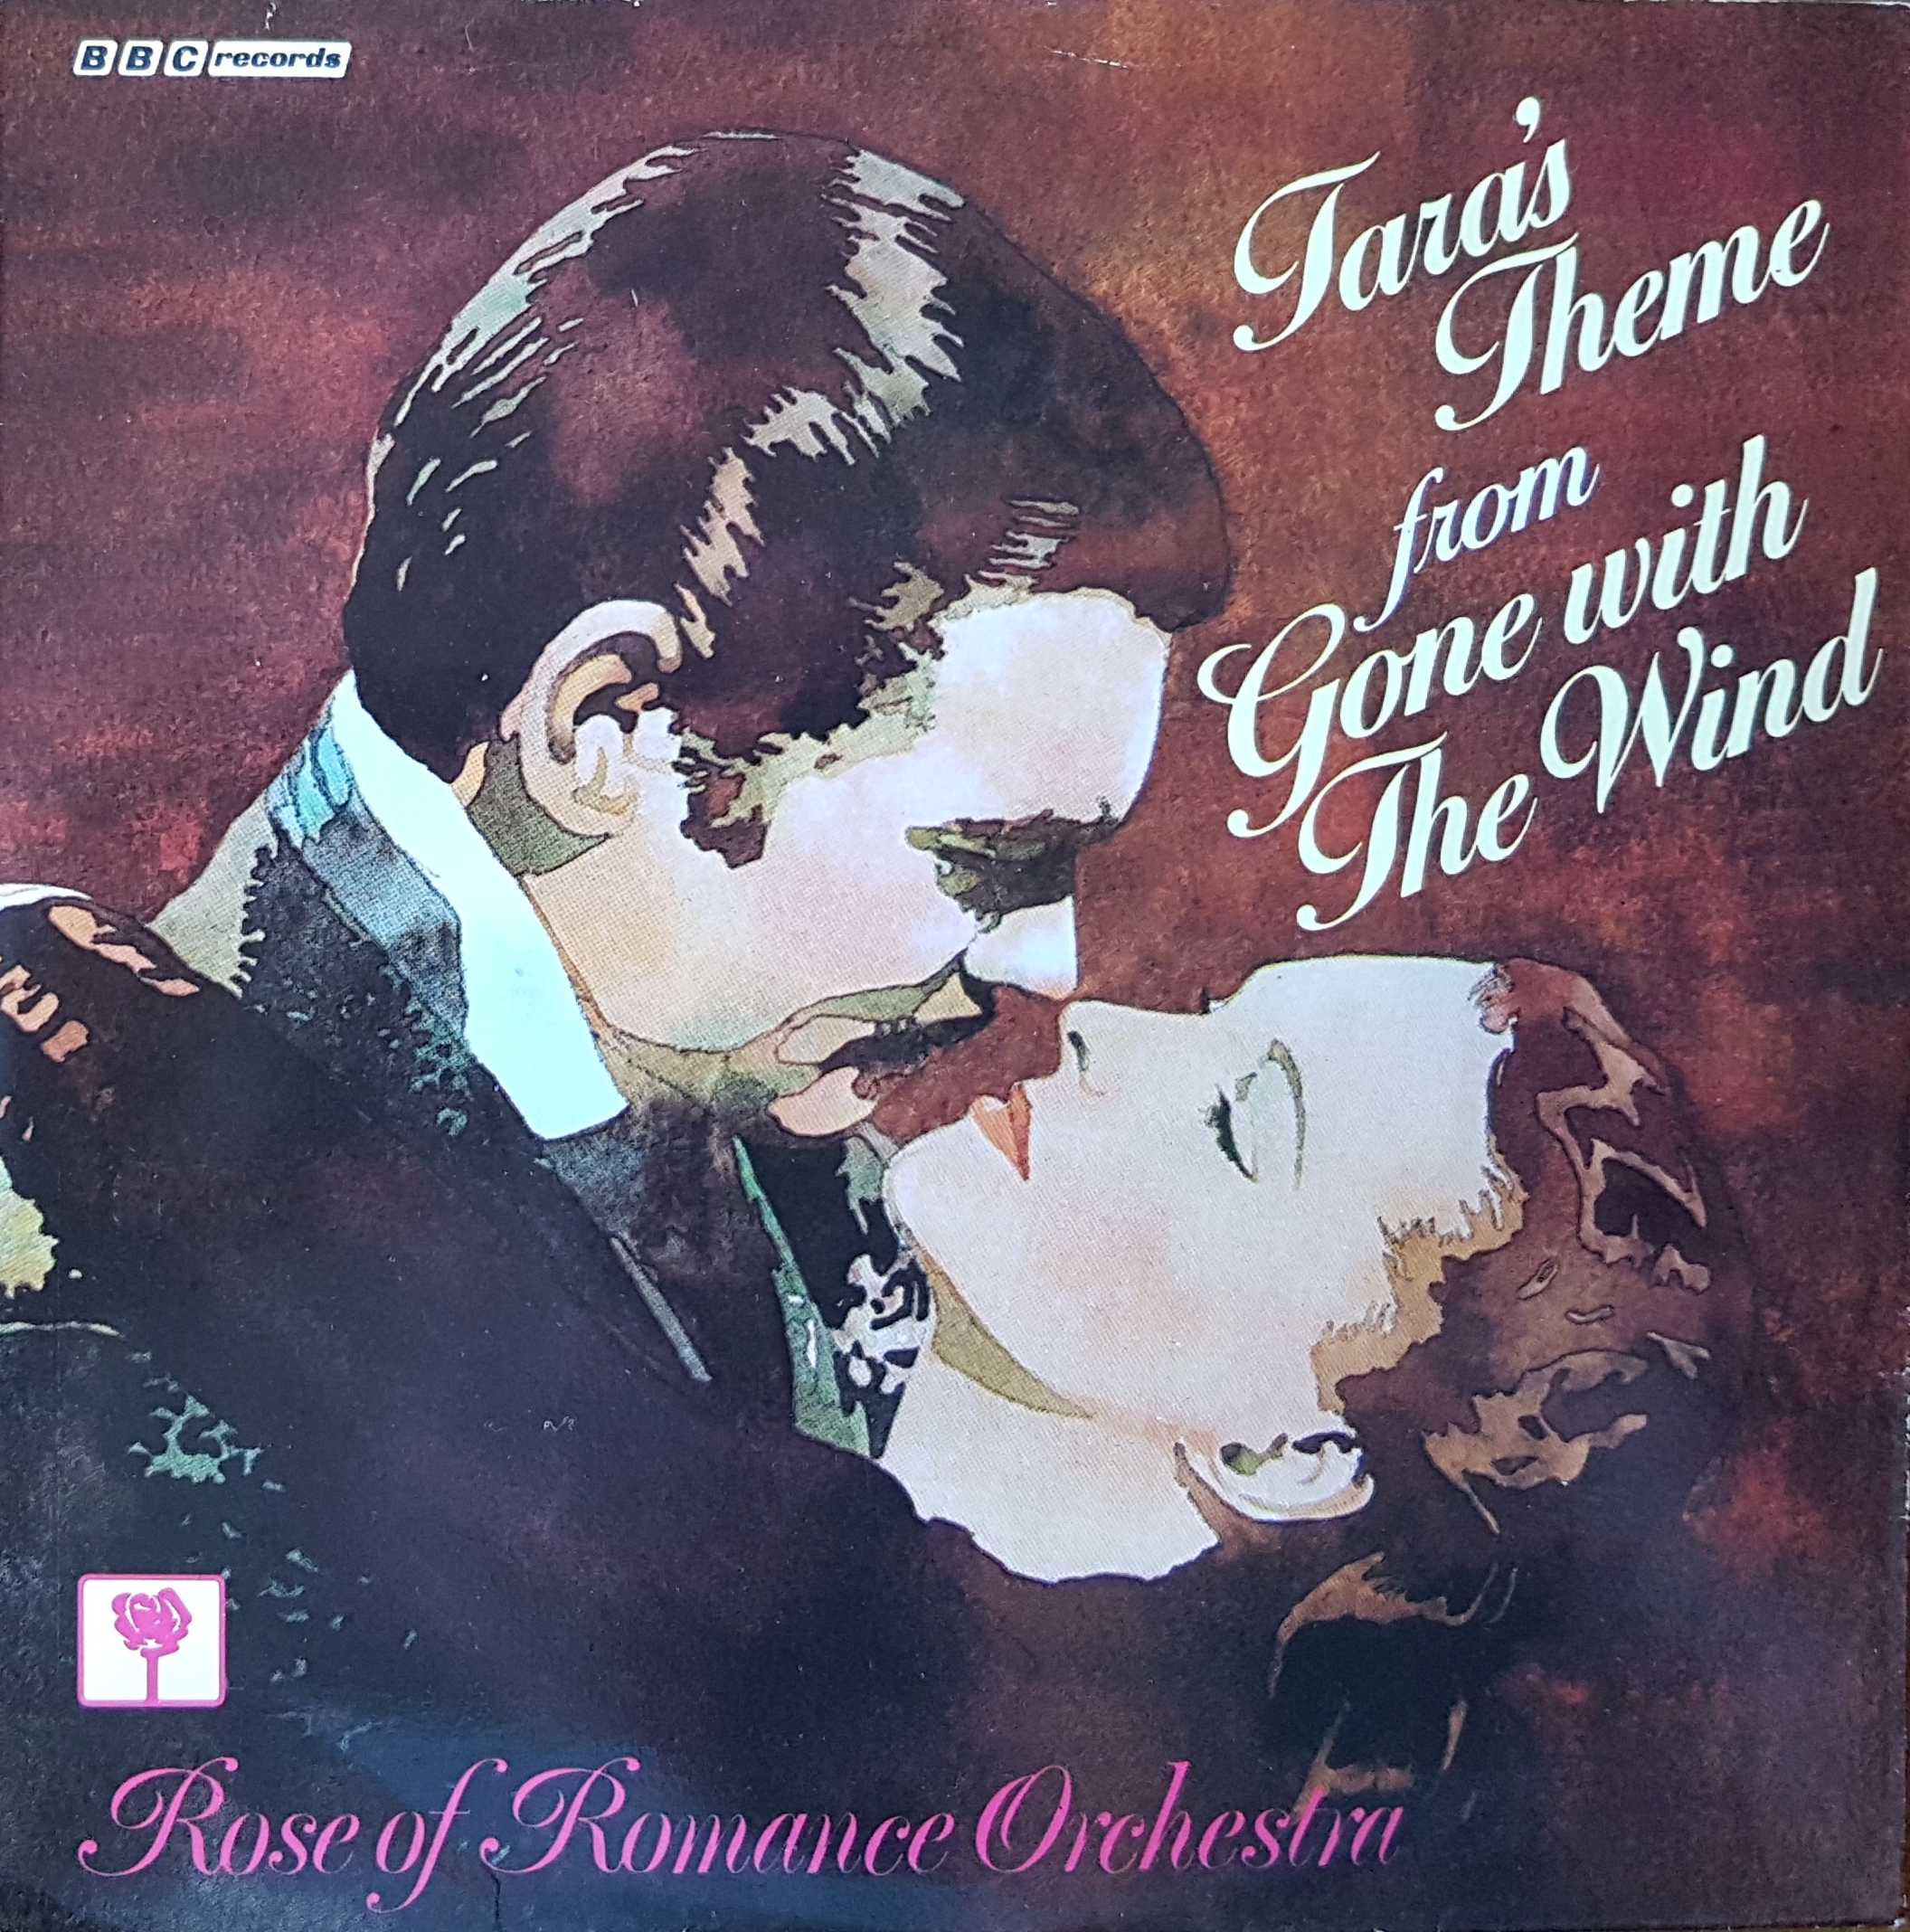 Picture of RESL 108 Tara's theme (Gone with the wind) by artist M. Steiner / M.Huckridge from the BBC records and Tapes library